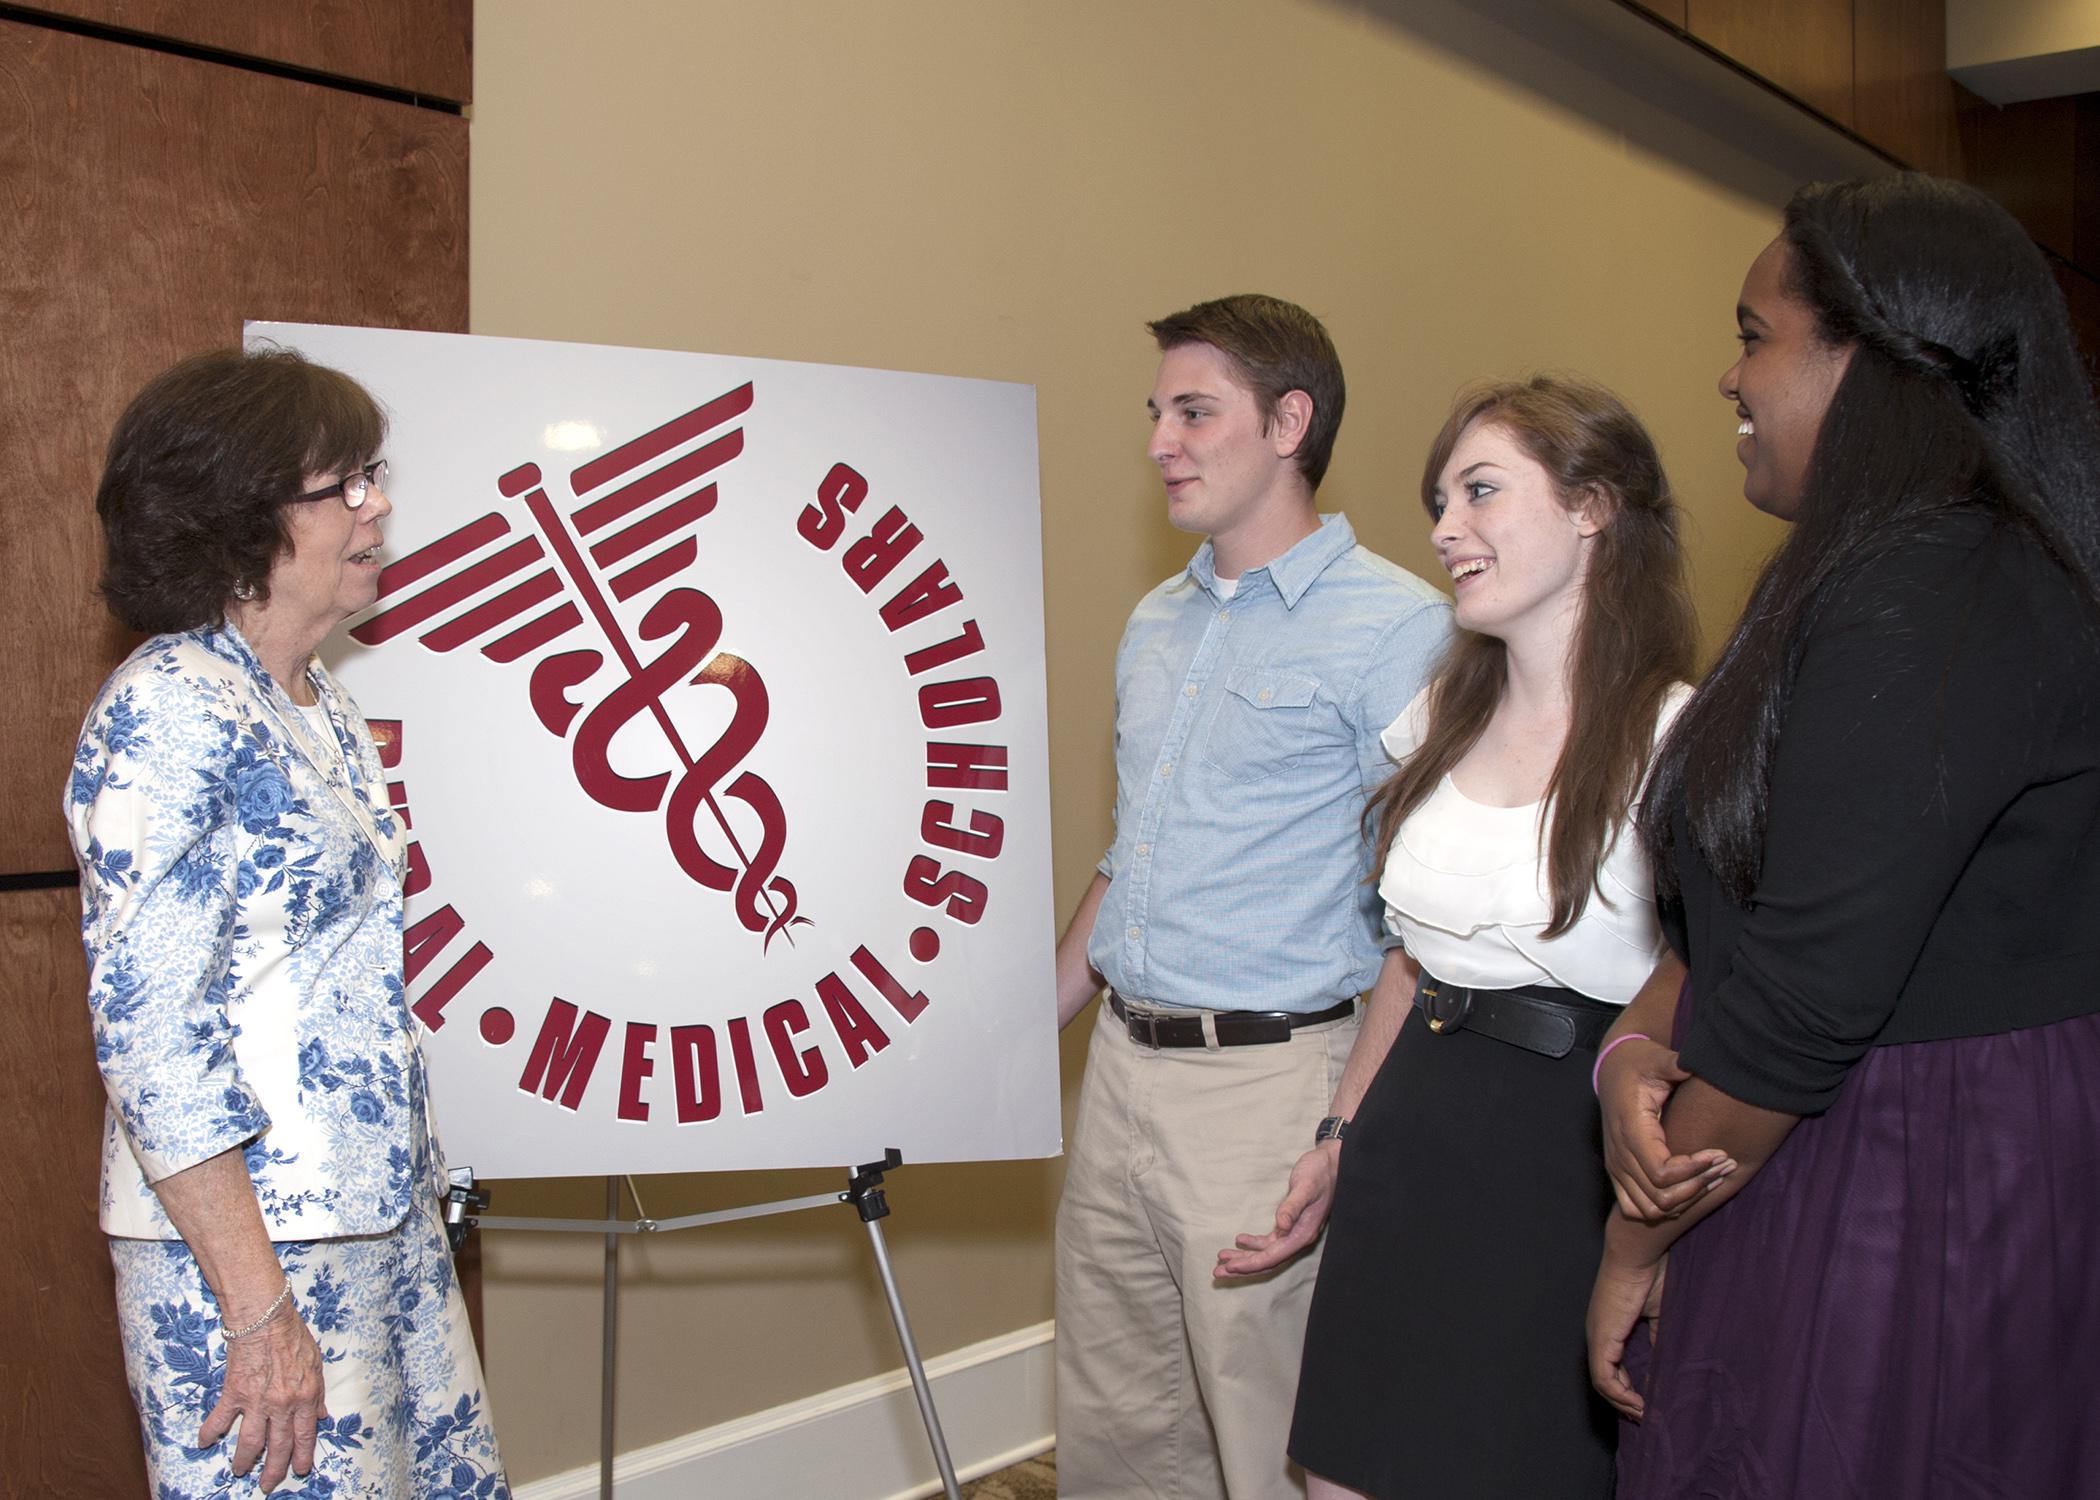 An instructor and three students have a discussion in front of a Rural Medical Scholars sign.